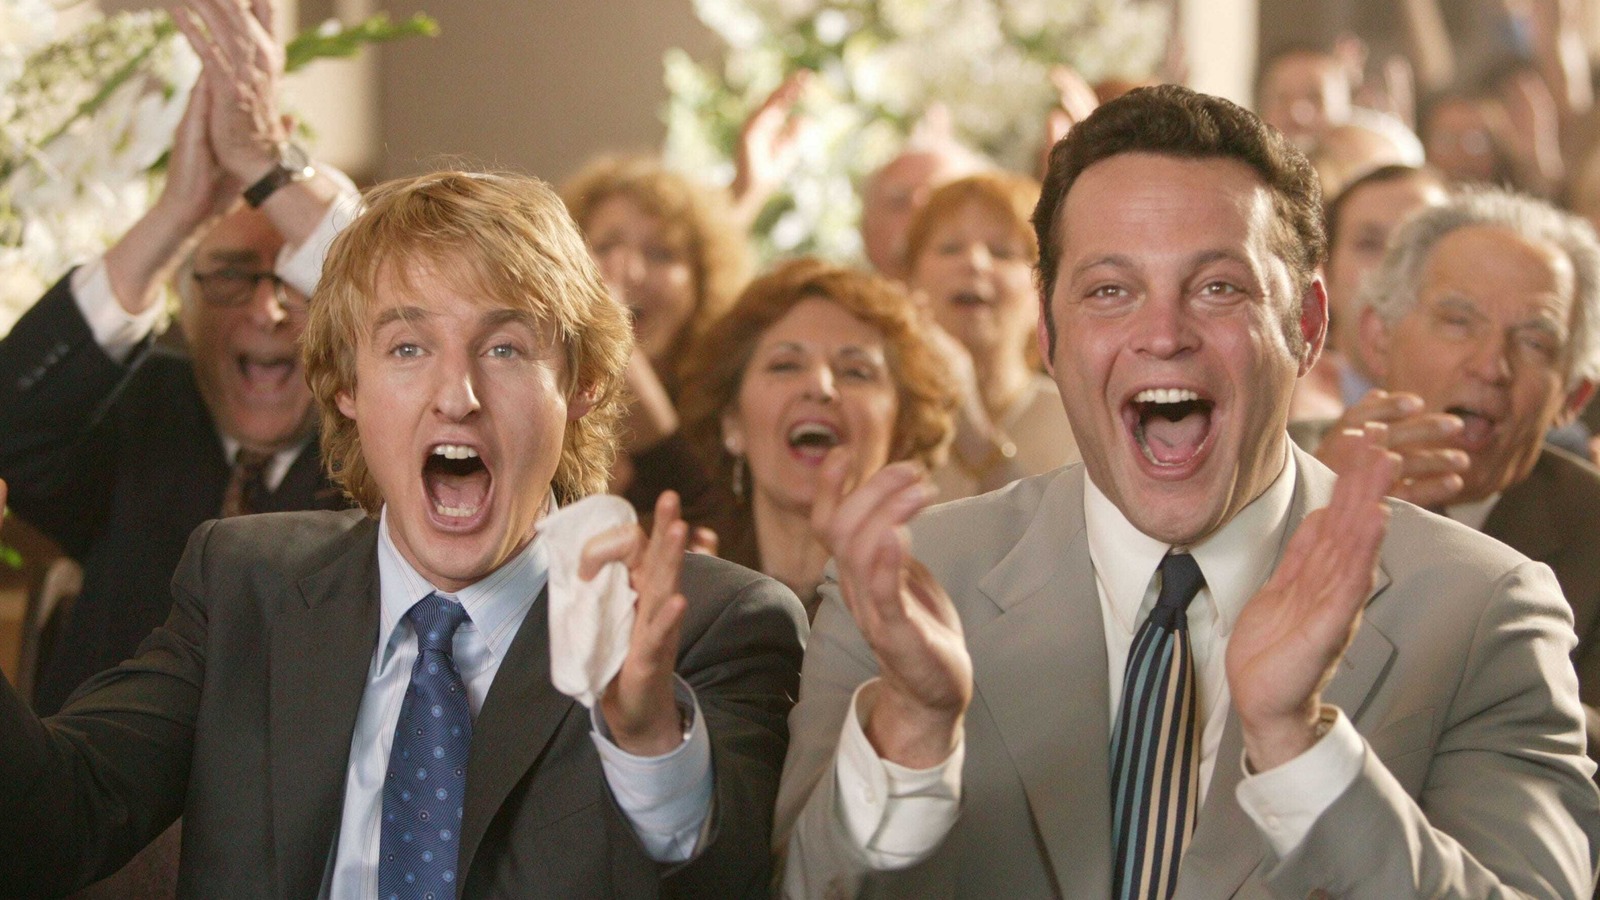 The Wedding Crashers Scene You Should Never Watch With Your Partner.